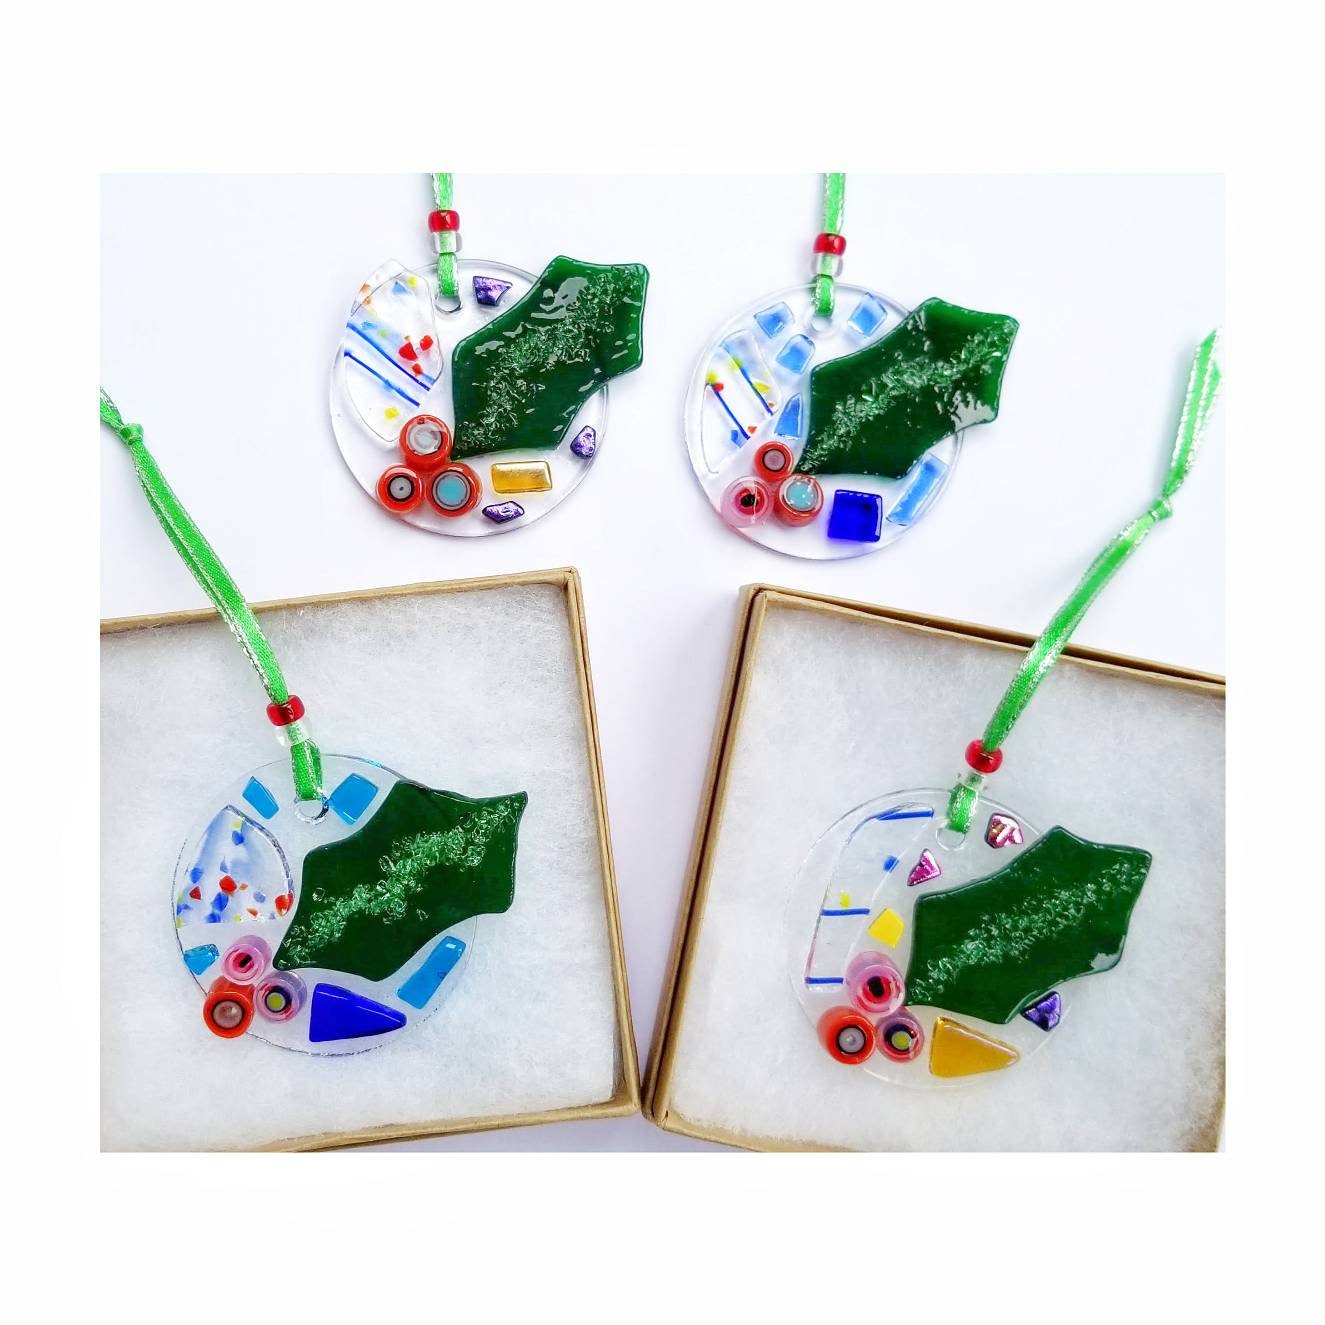 Fused Glass Holiday Ornaments, Gift Tags. Bright Colors with Red & Green Glass are kiln fired and melted onto a two inch clear circle.